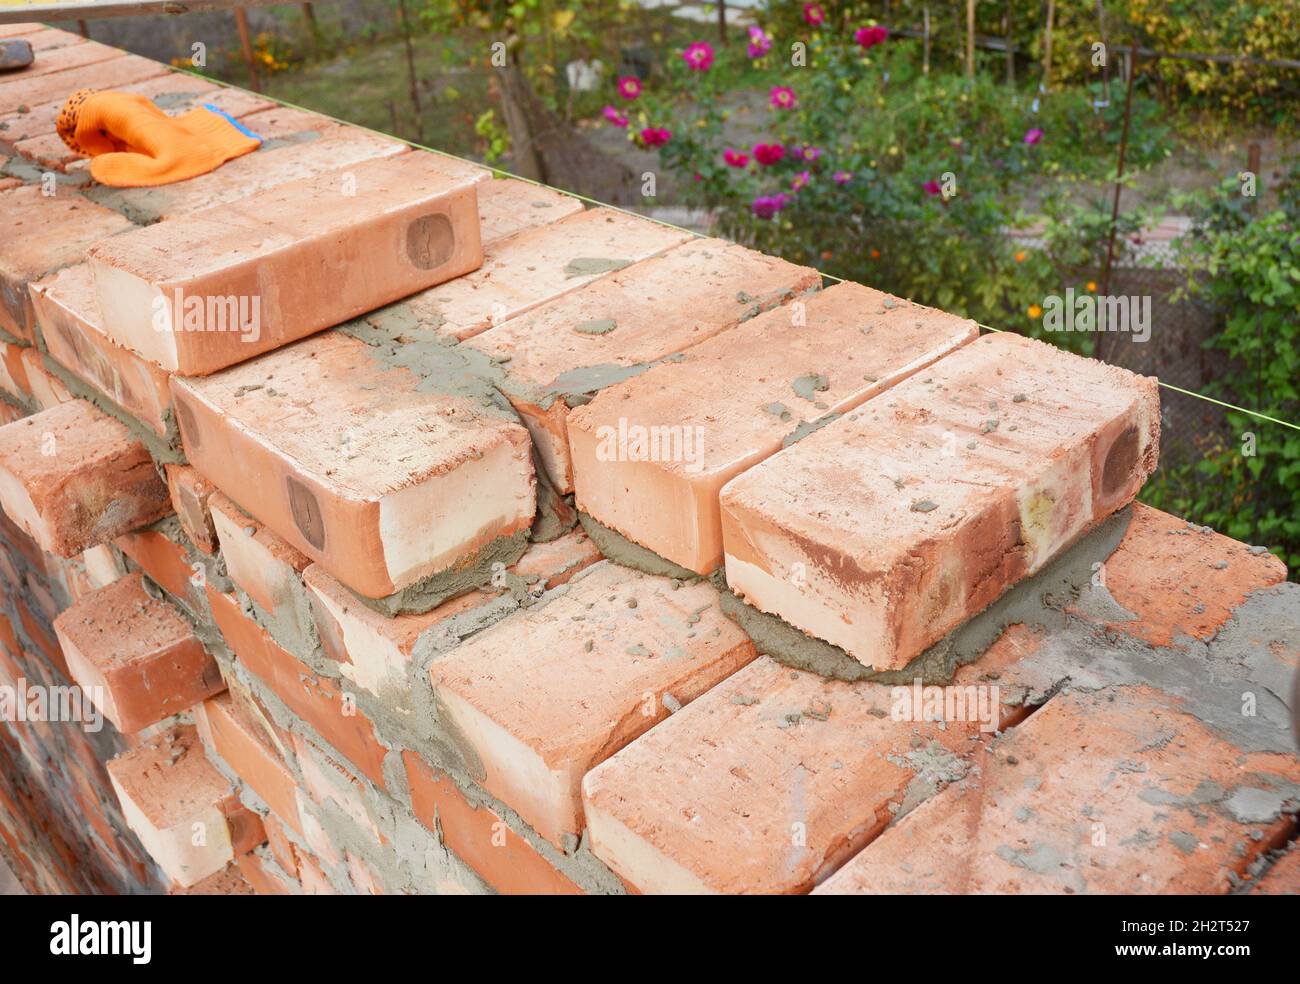 Bricklaying, Brickwork. Bricklaying on House Construction Site. Building Home wall from Bricks. Stock Photo